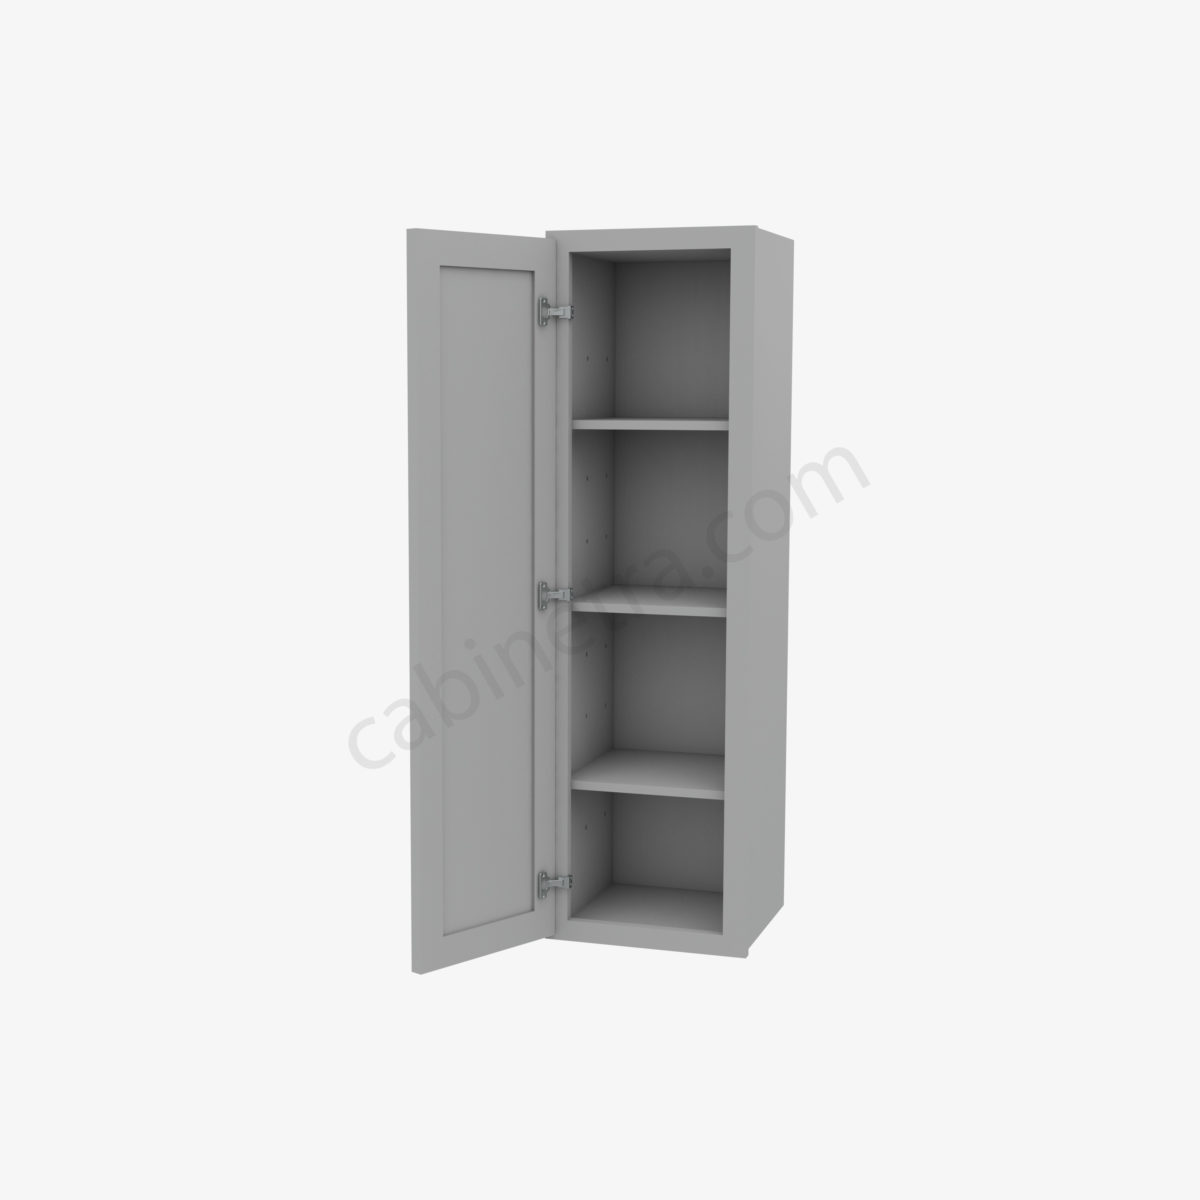 AB W1242 5 Forevermark Lait Gray Shaker Cabinetra scaled